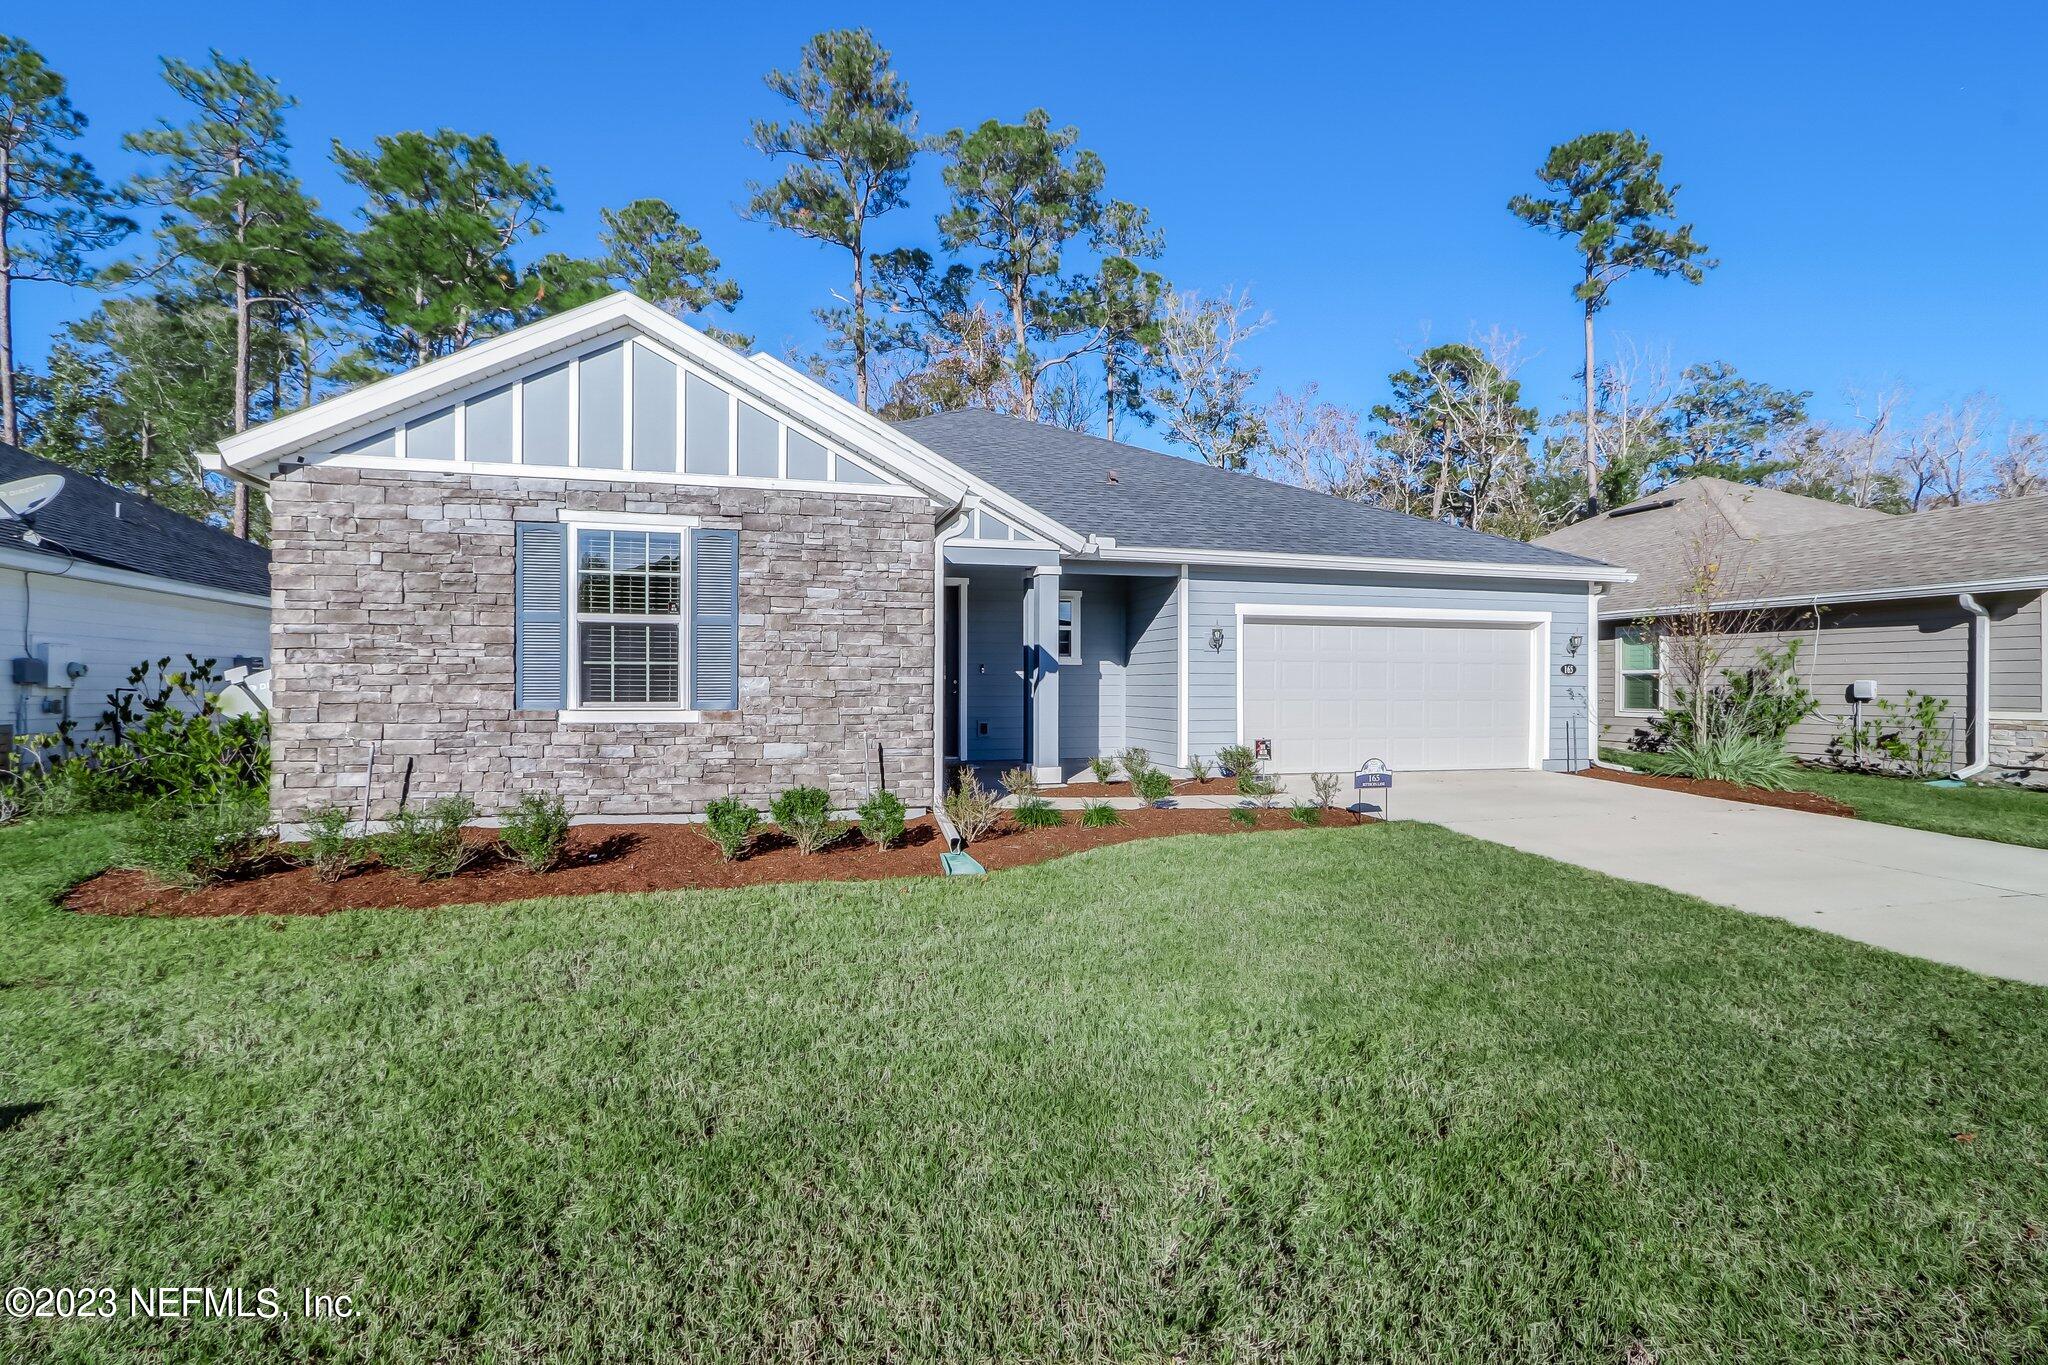 St Johns, FL home for sale located at 165 Rittburn Ln, St Johns, FL 32259